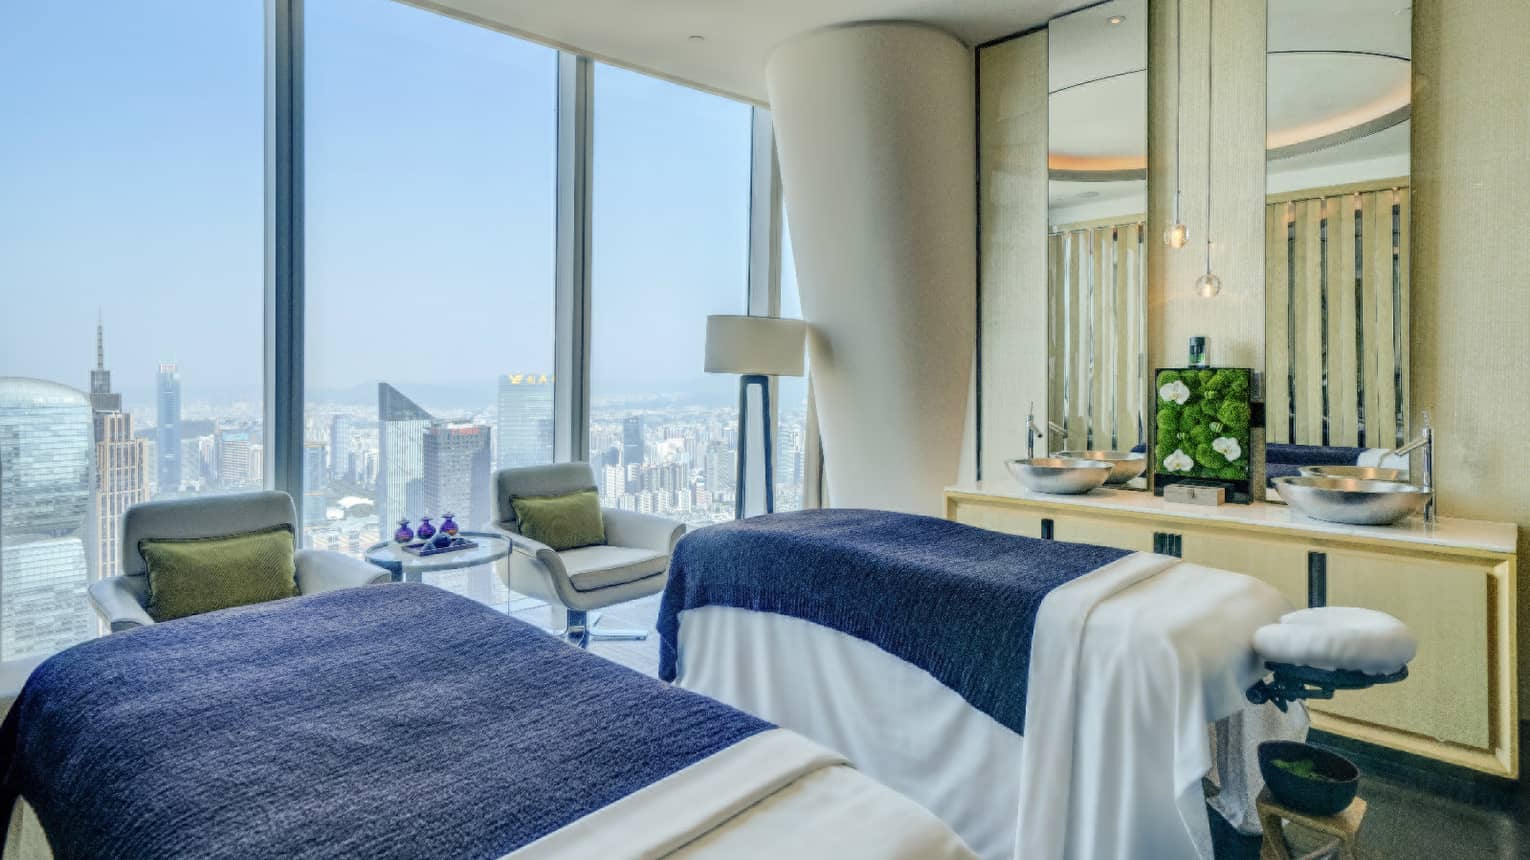 Spa room with twin massage tables, accent chairs, floor-to-ceiling windows with city views